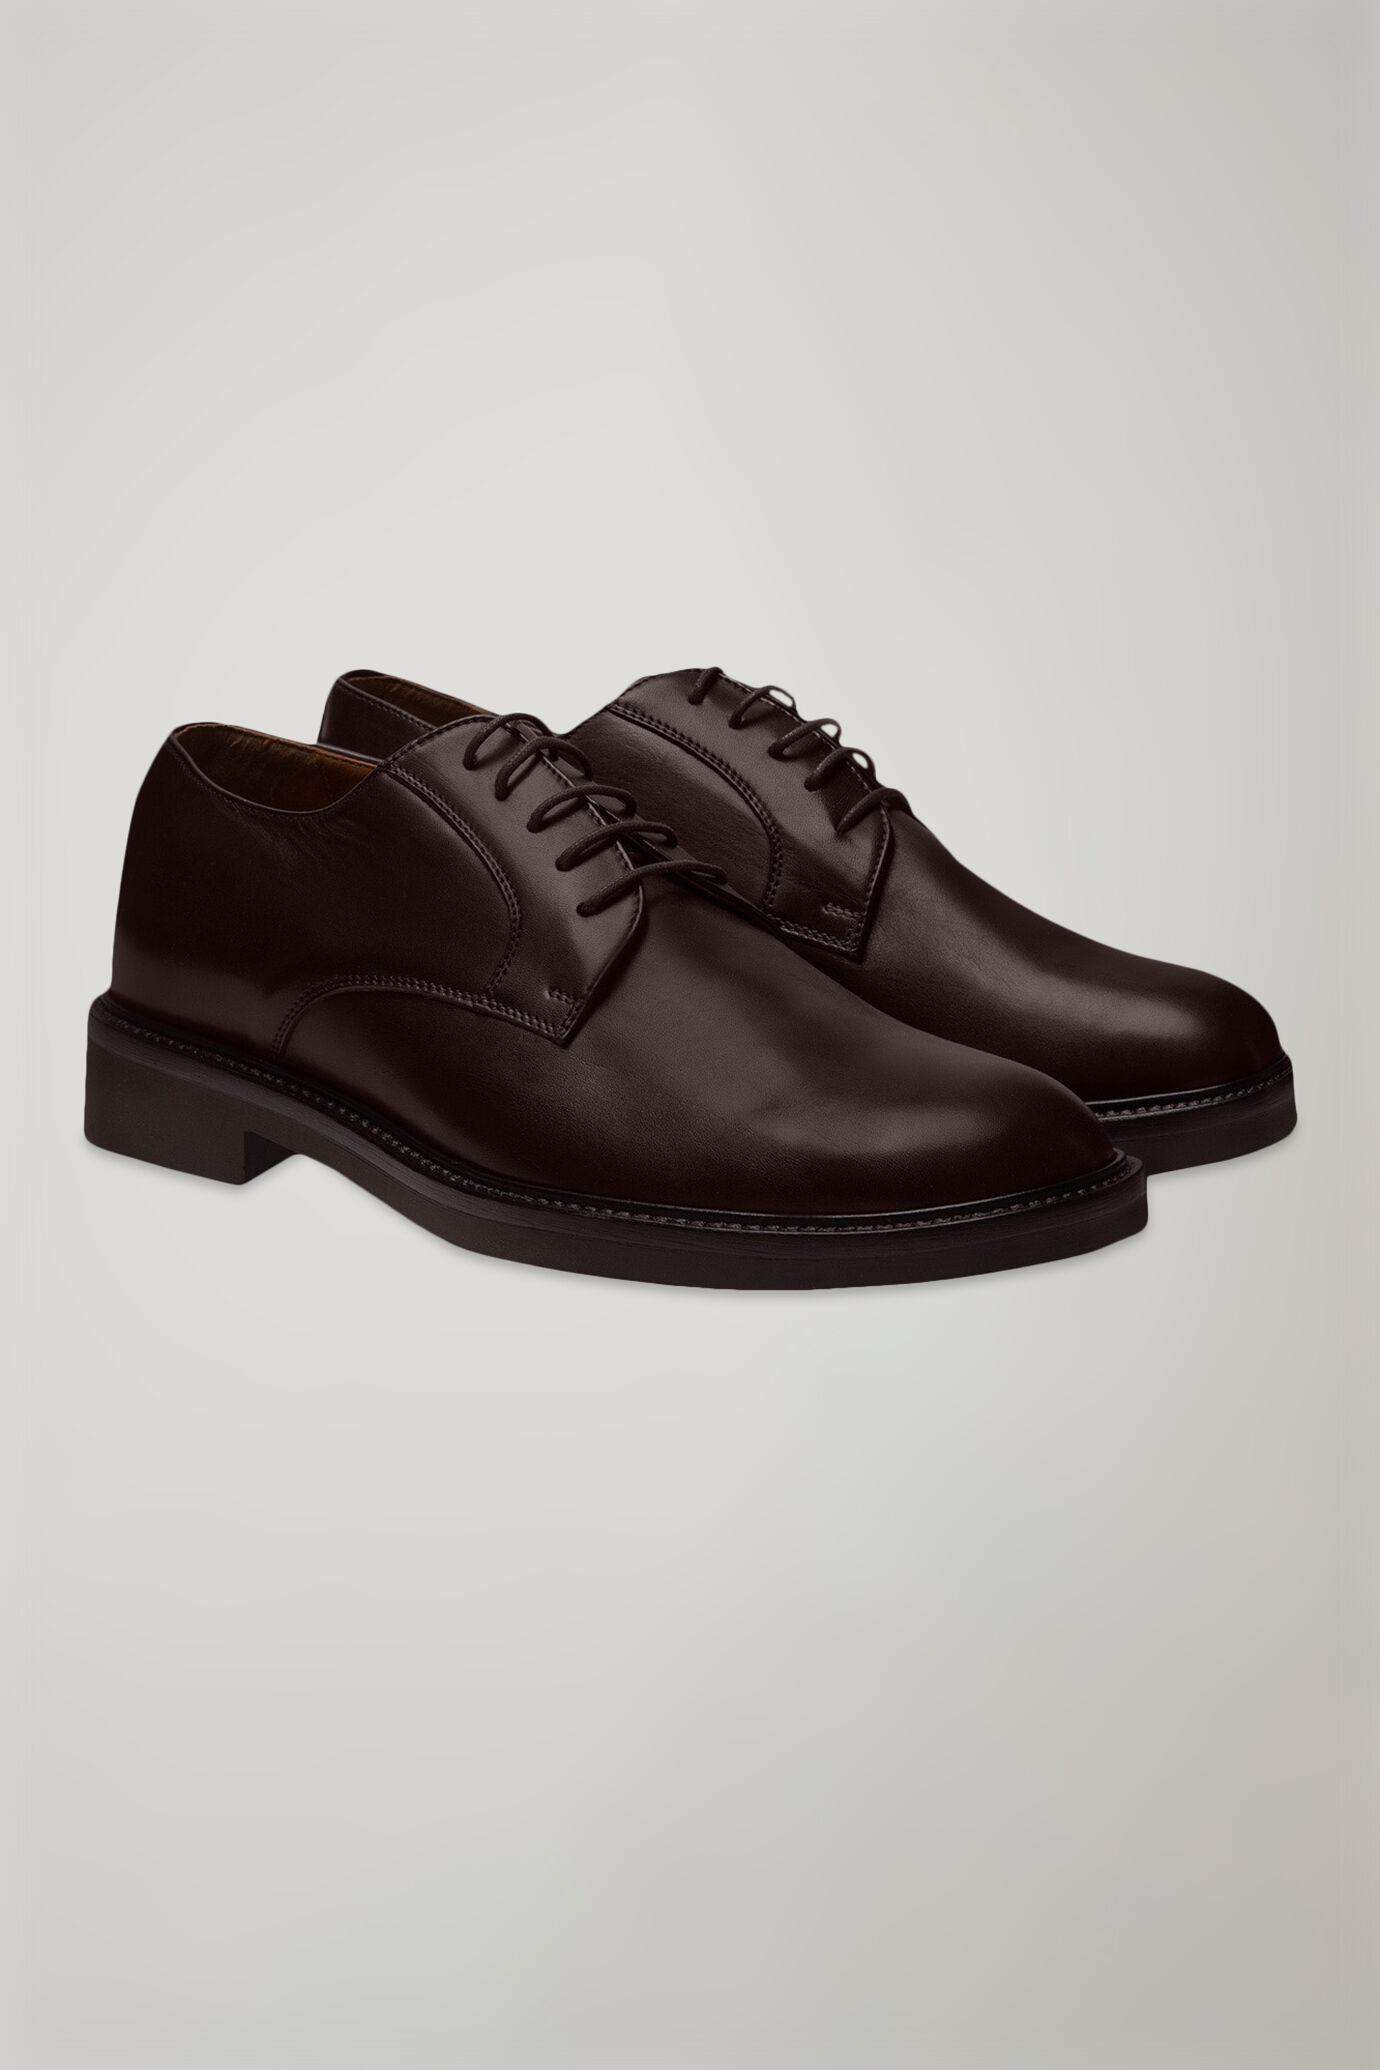 Derby shoes 100% leather | Doppelganger | Shoes